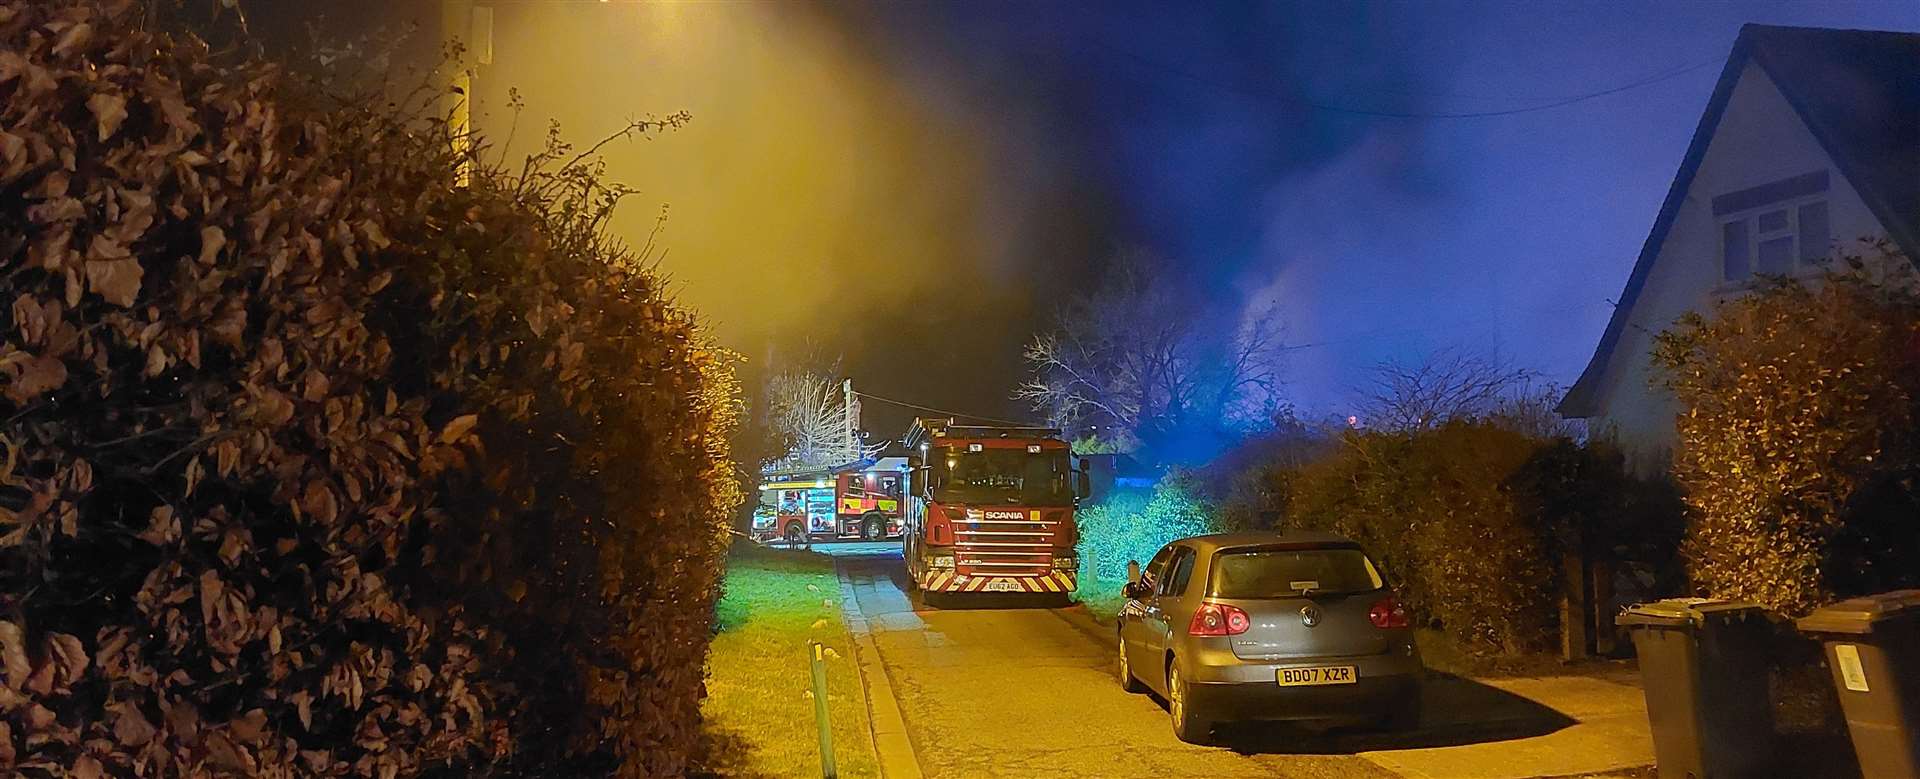 Firefighters are battling a blaze at the junction of Hackington Road and Summer Lane